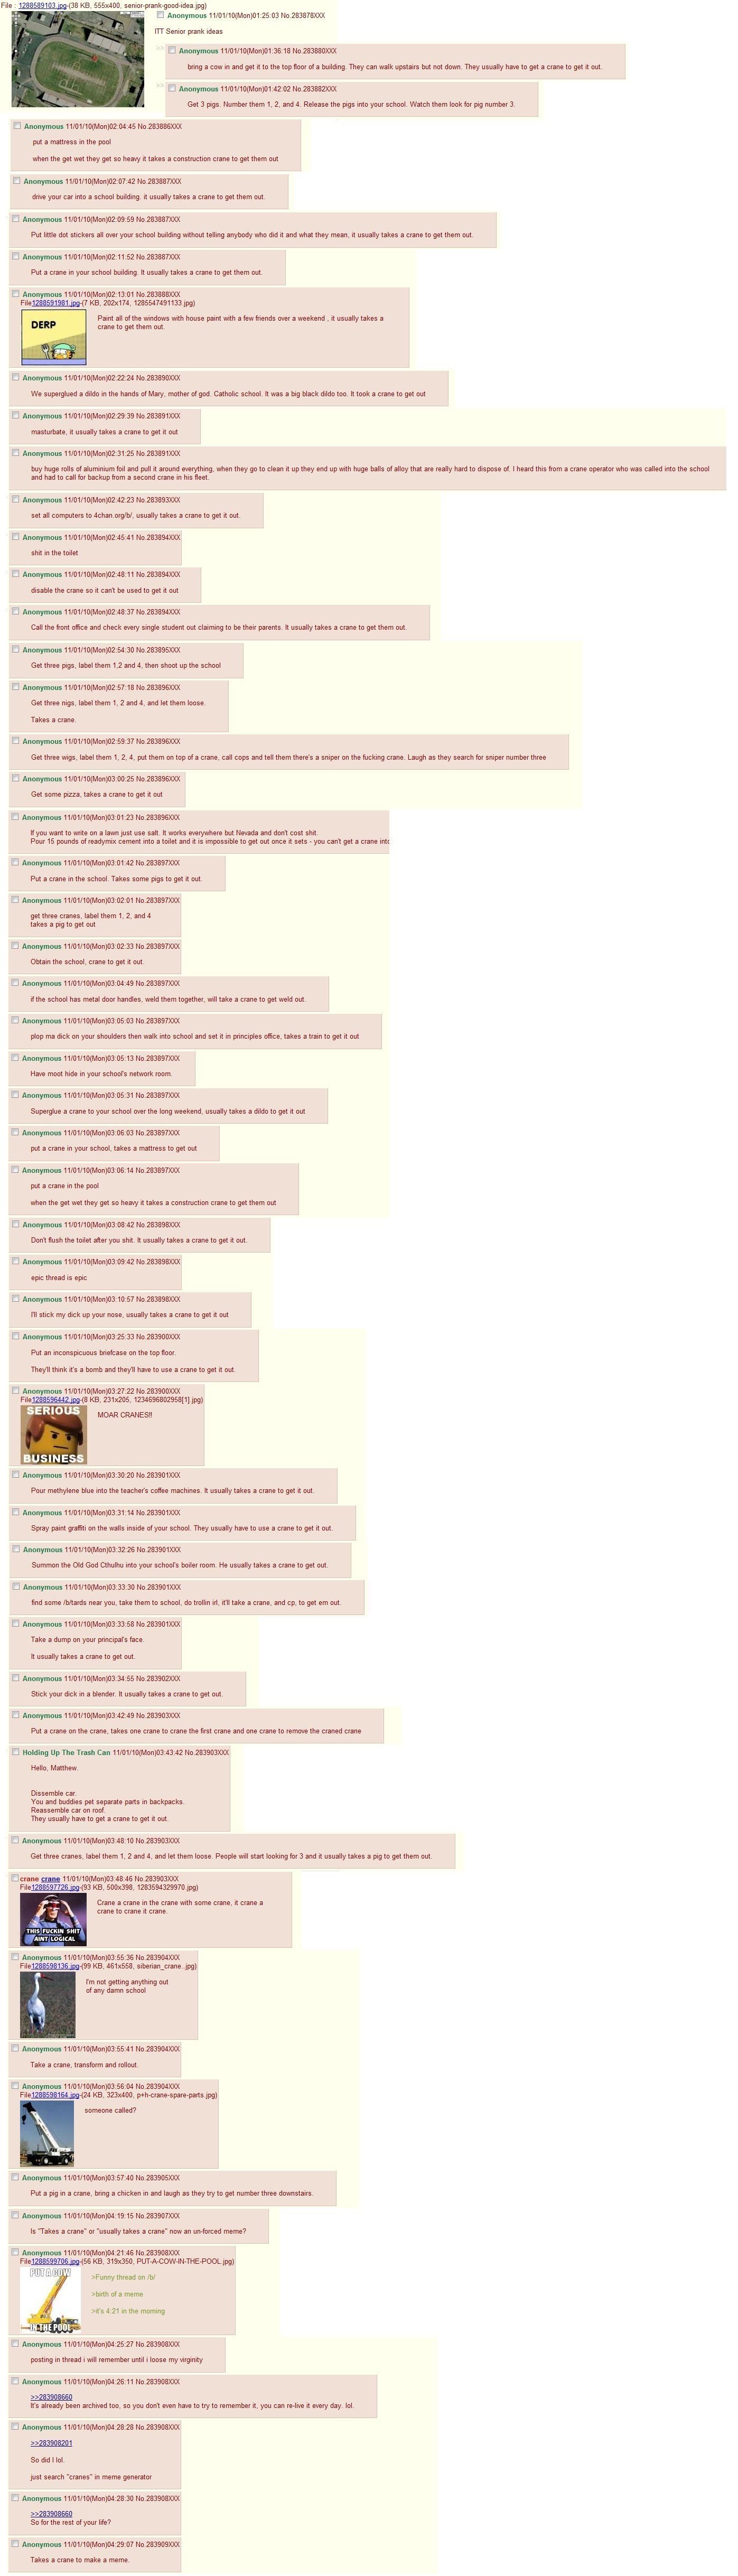 Anon comes up with senior pranks